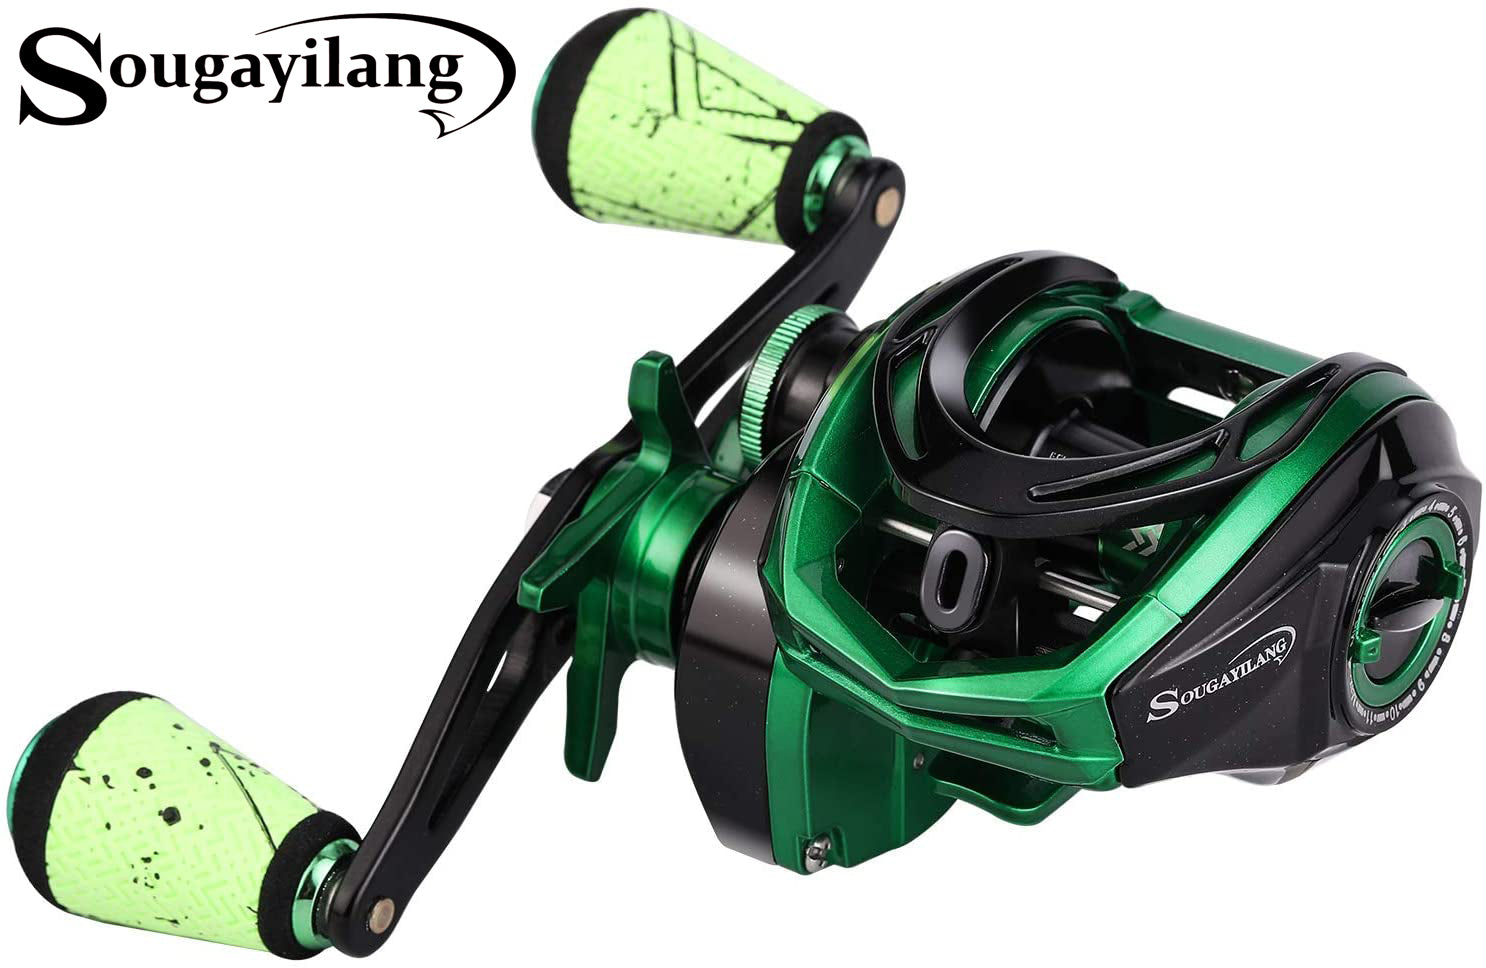 Sougayilang Fishing Reels, Super Smooth Casting Reel with Magnetic